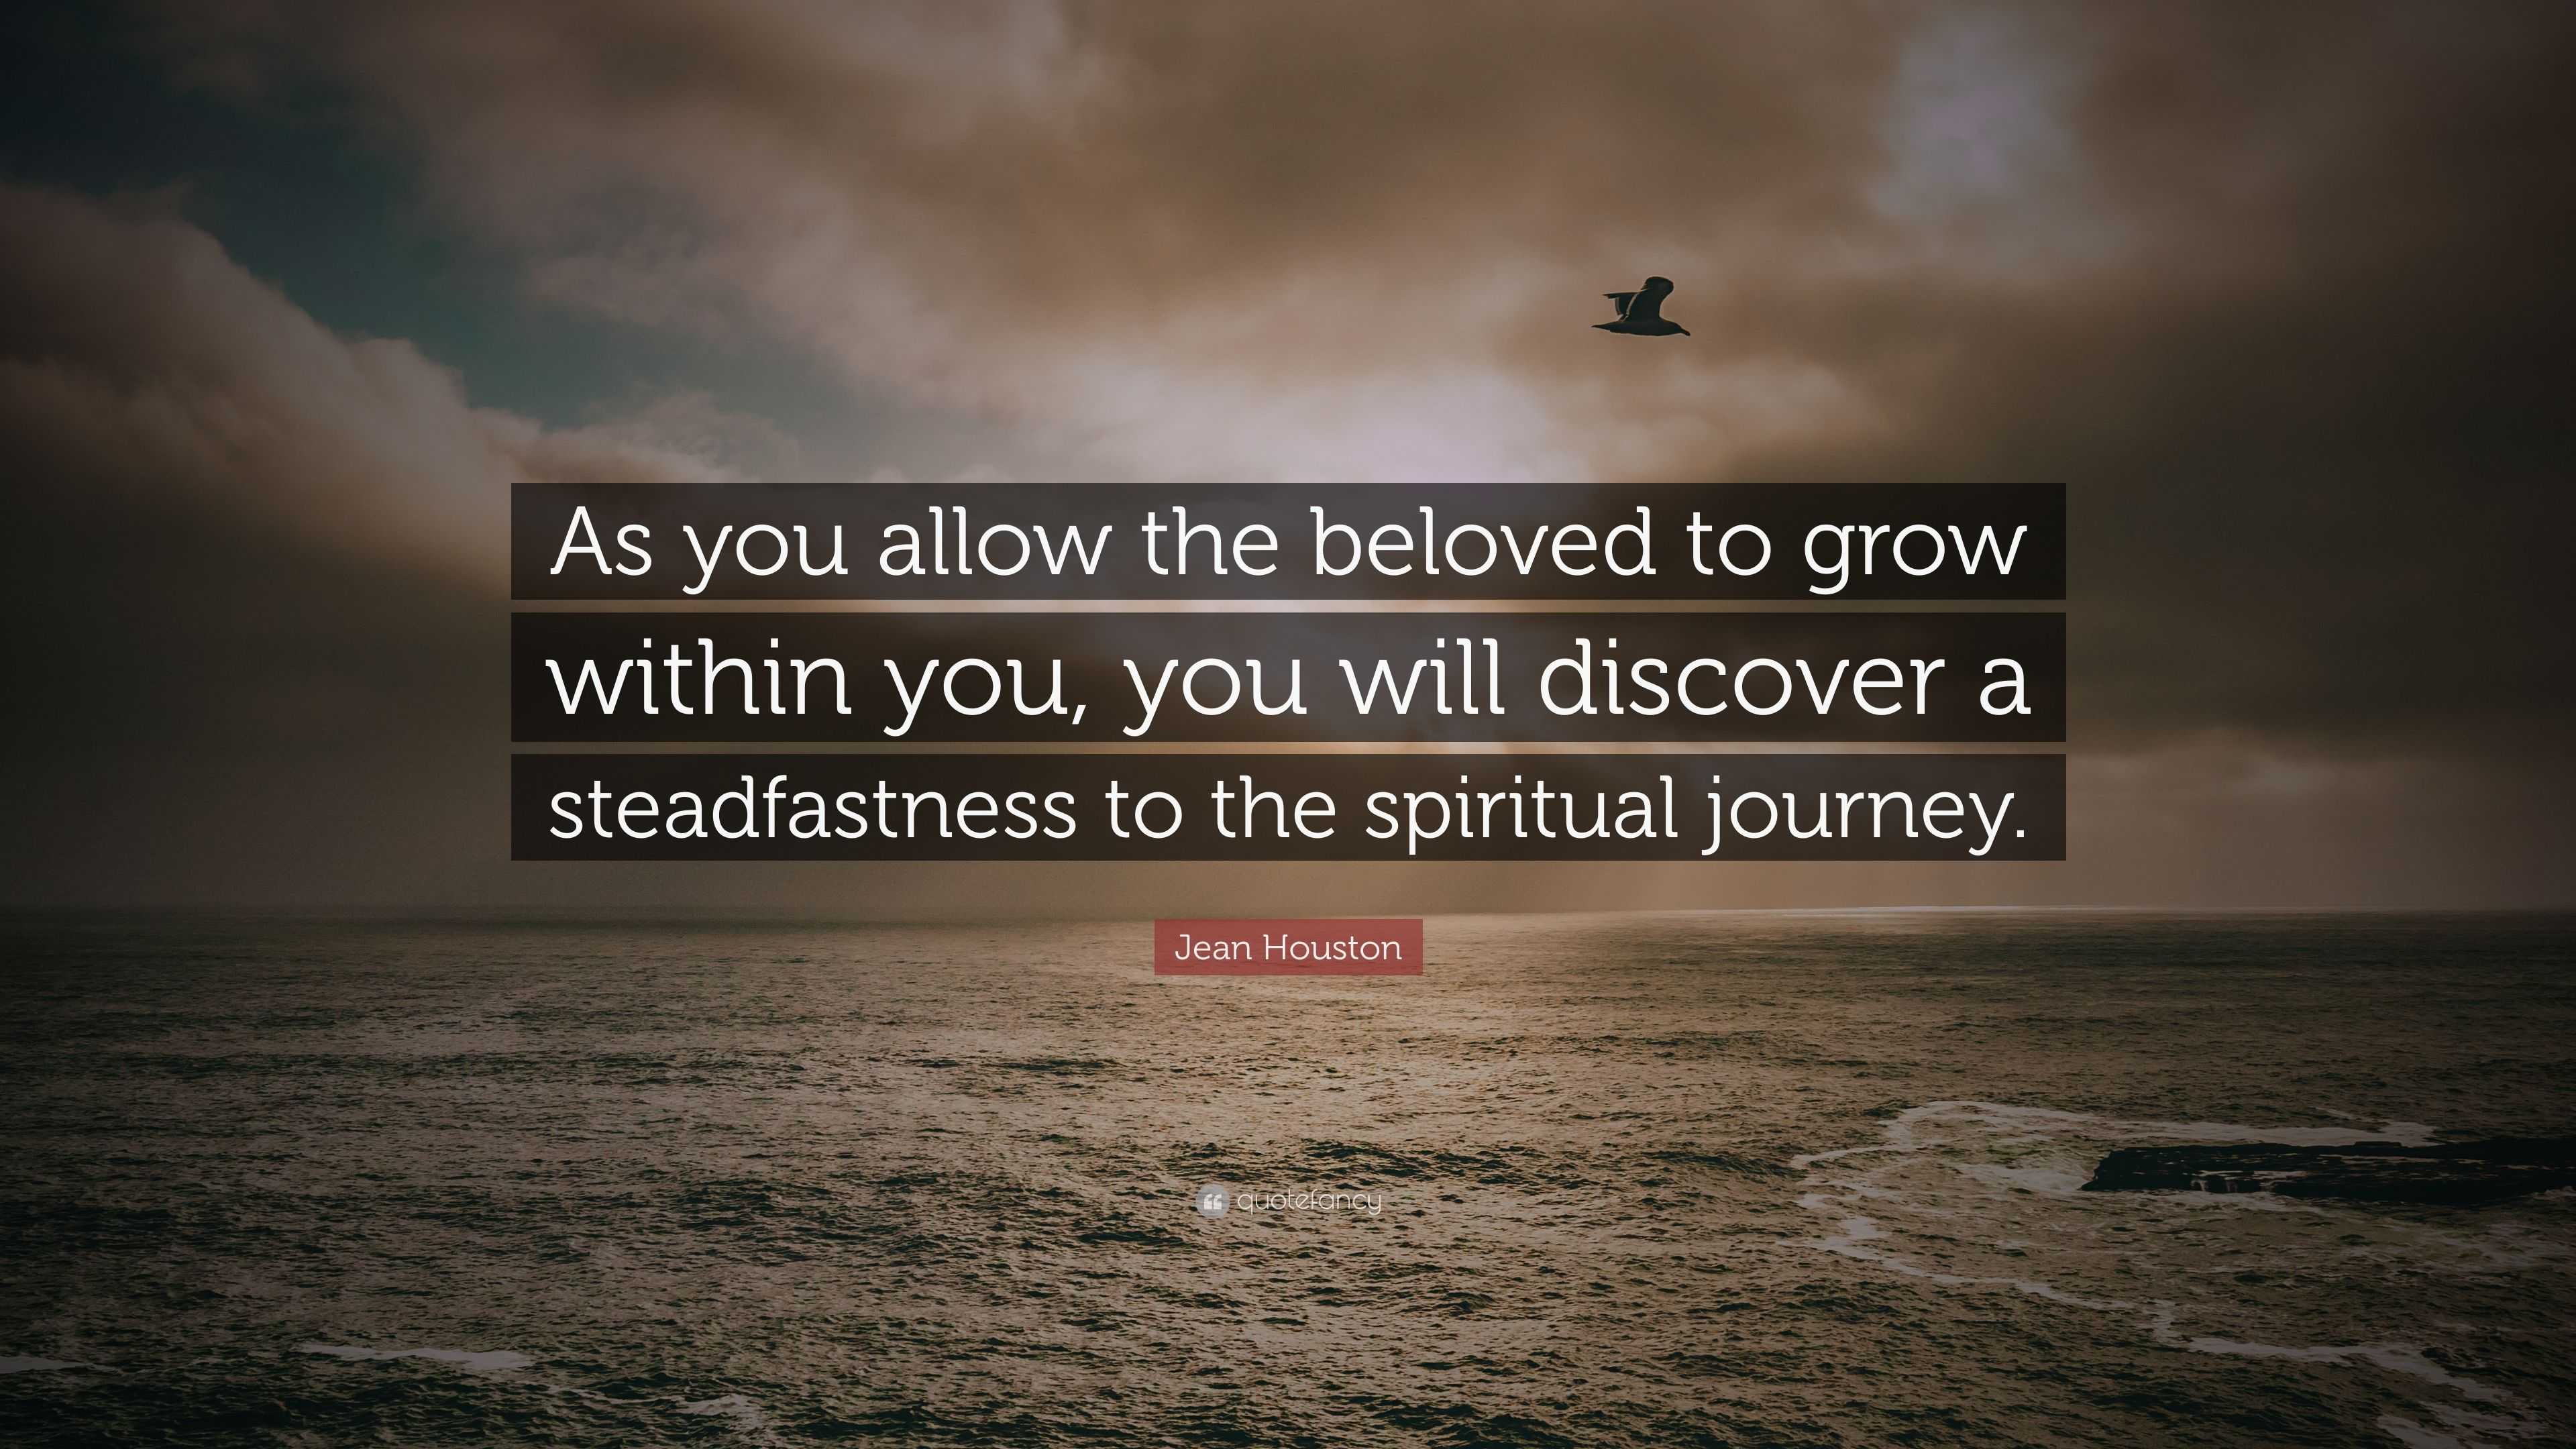 Jean Houston Quote: “As you allow the beloved to grow within you, you ...